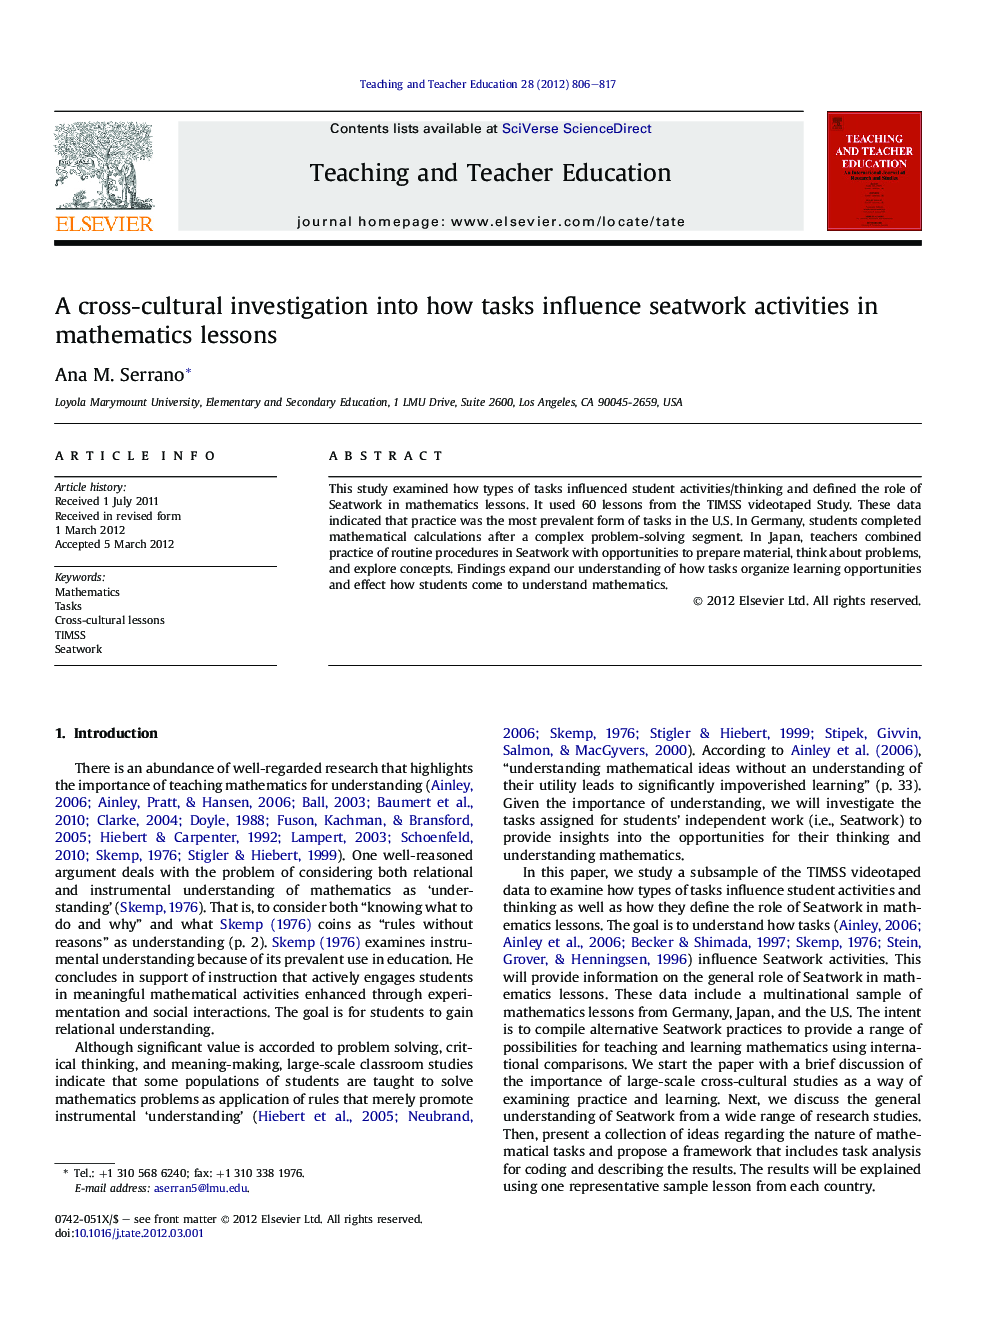 A cross-cultural investigation into how tasks influence seatwork activities in mathematics lessons